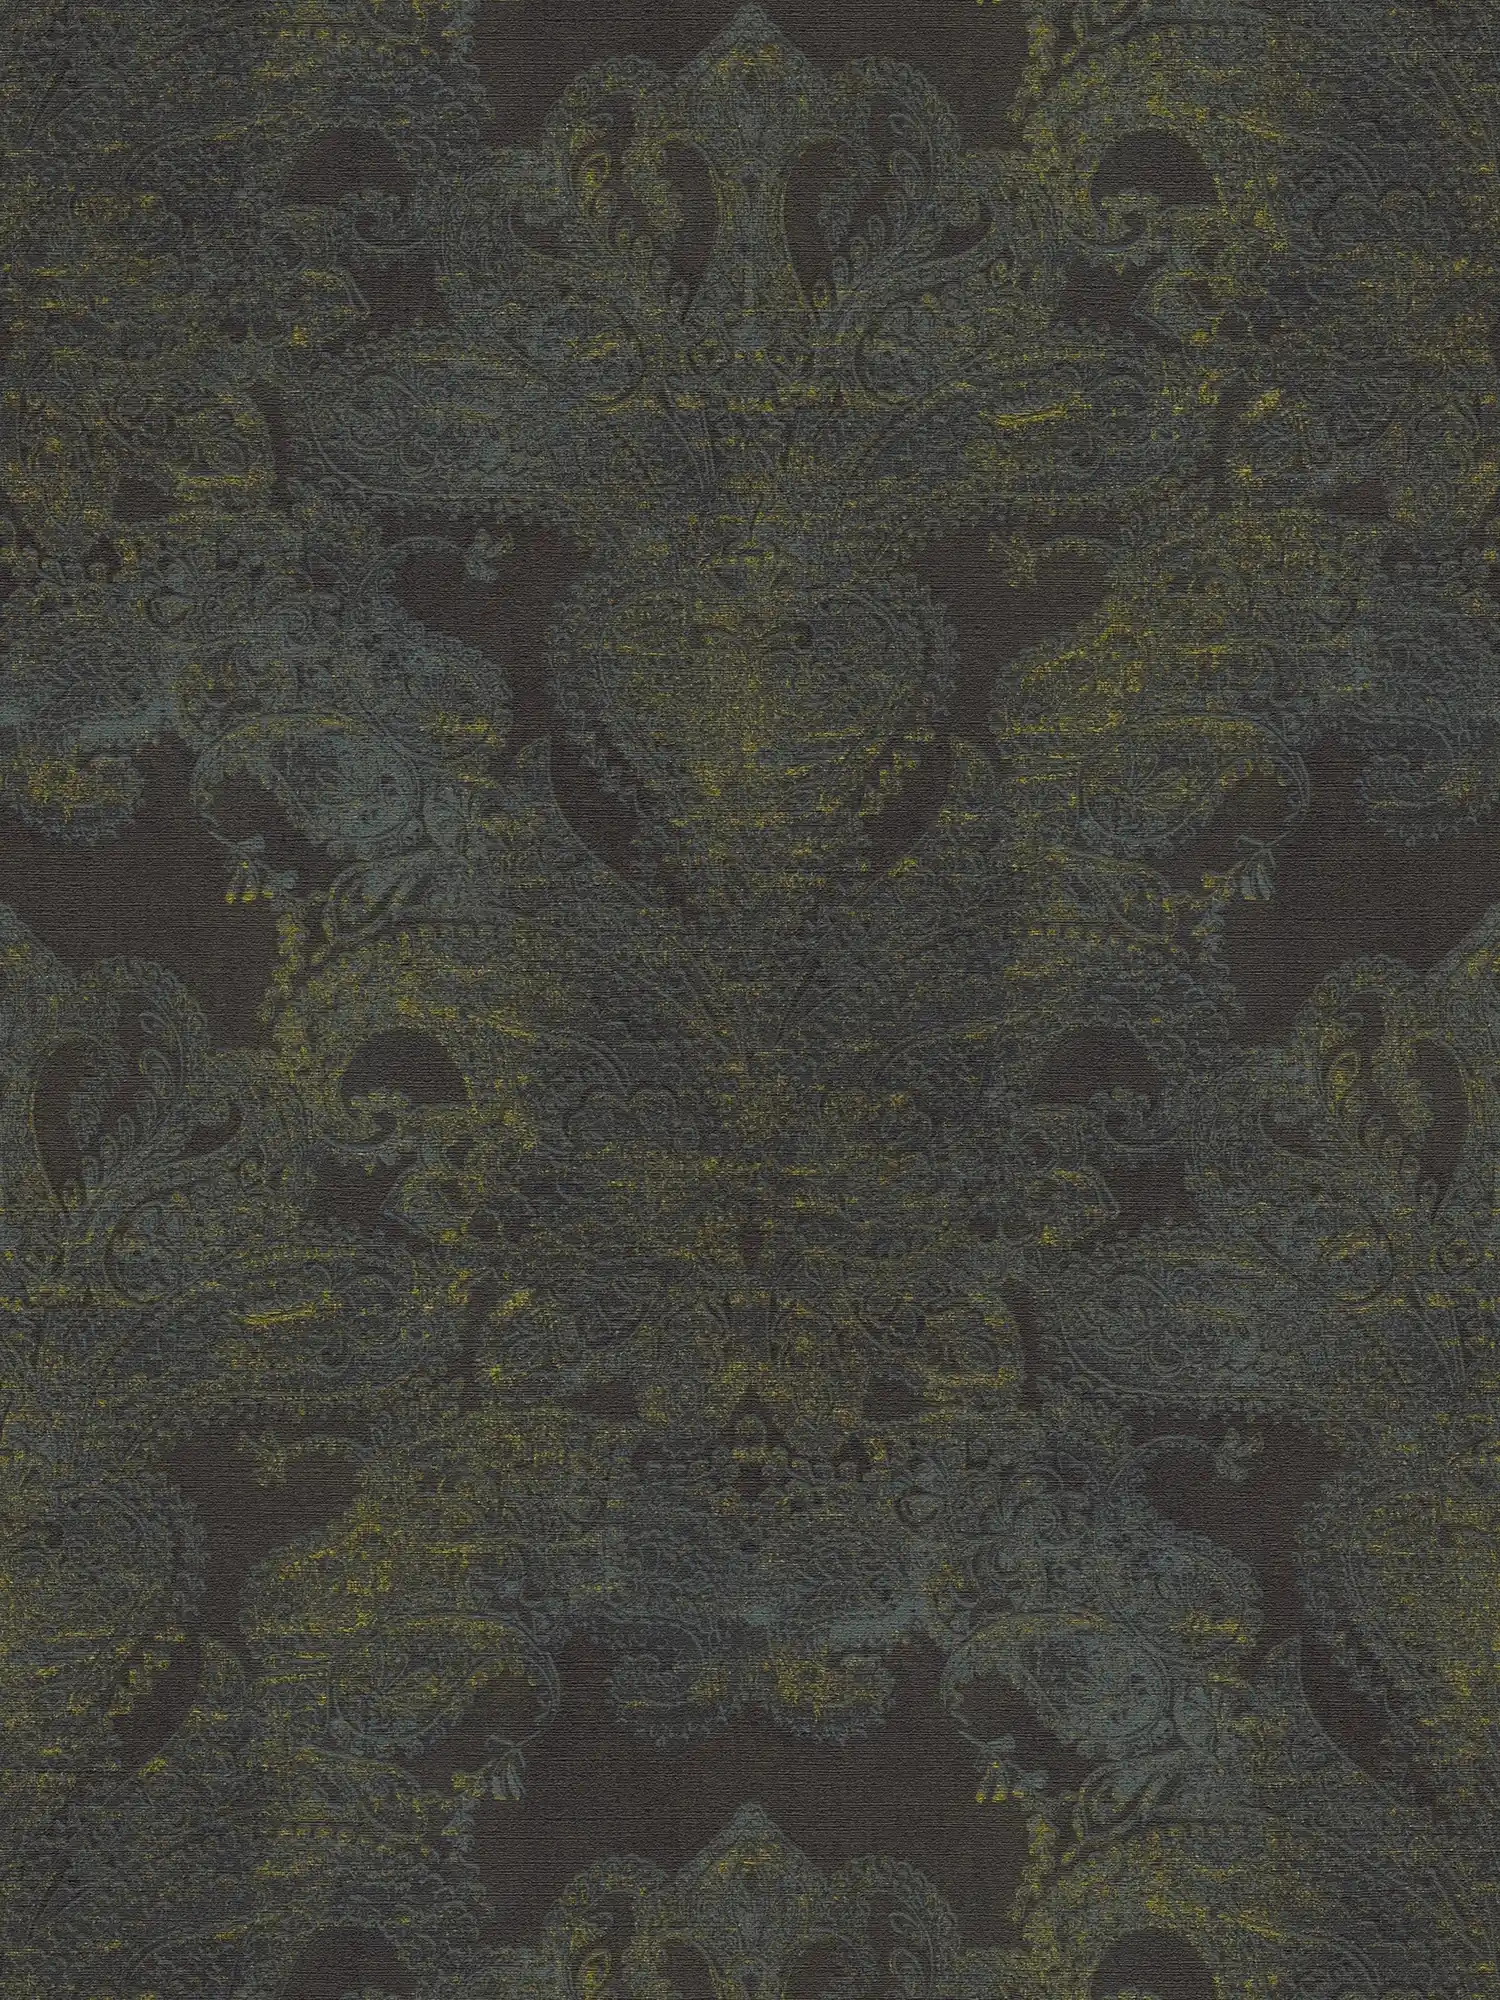 Baroque style non-woven wallpaper with ornaments - black, blue, yellow
